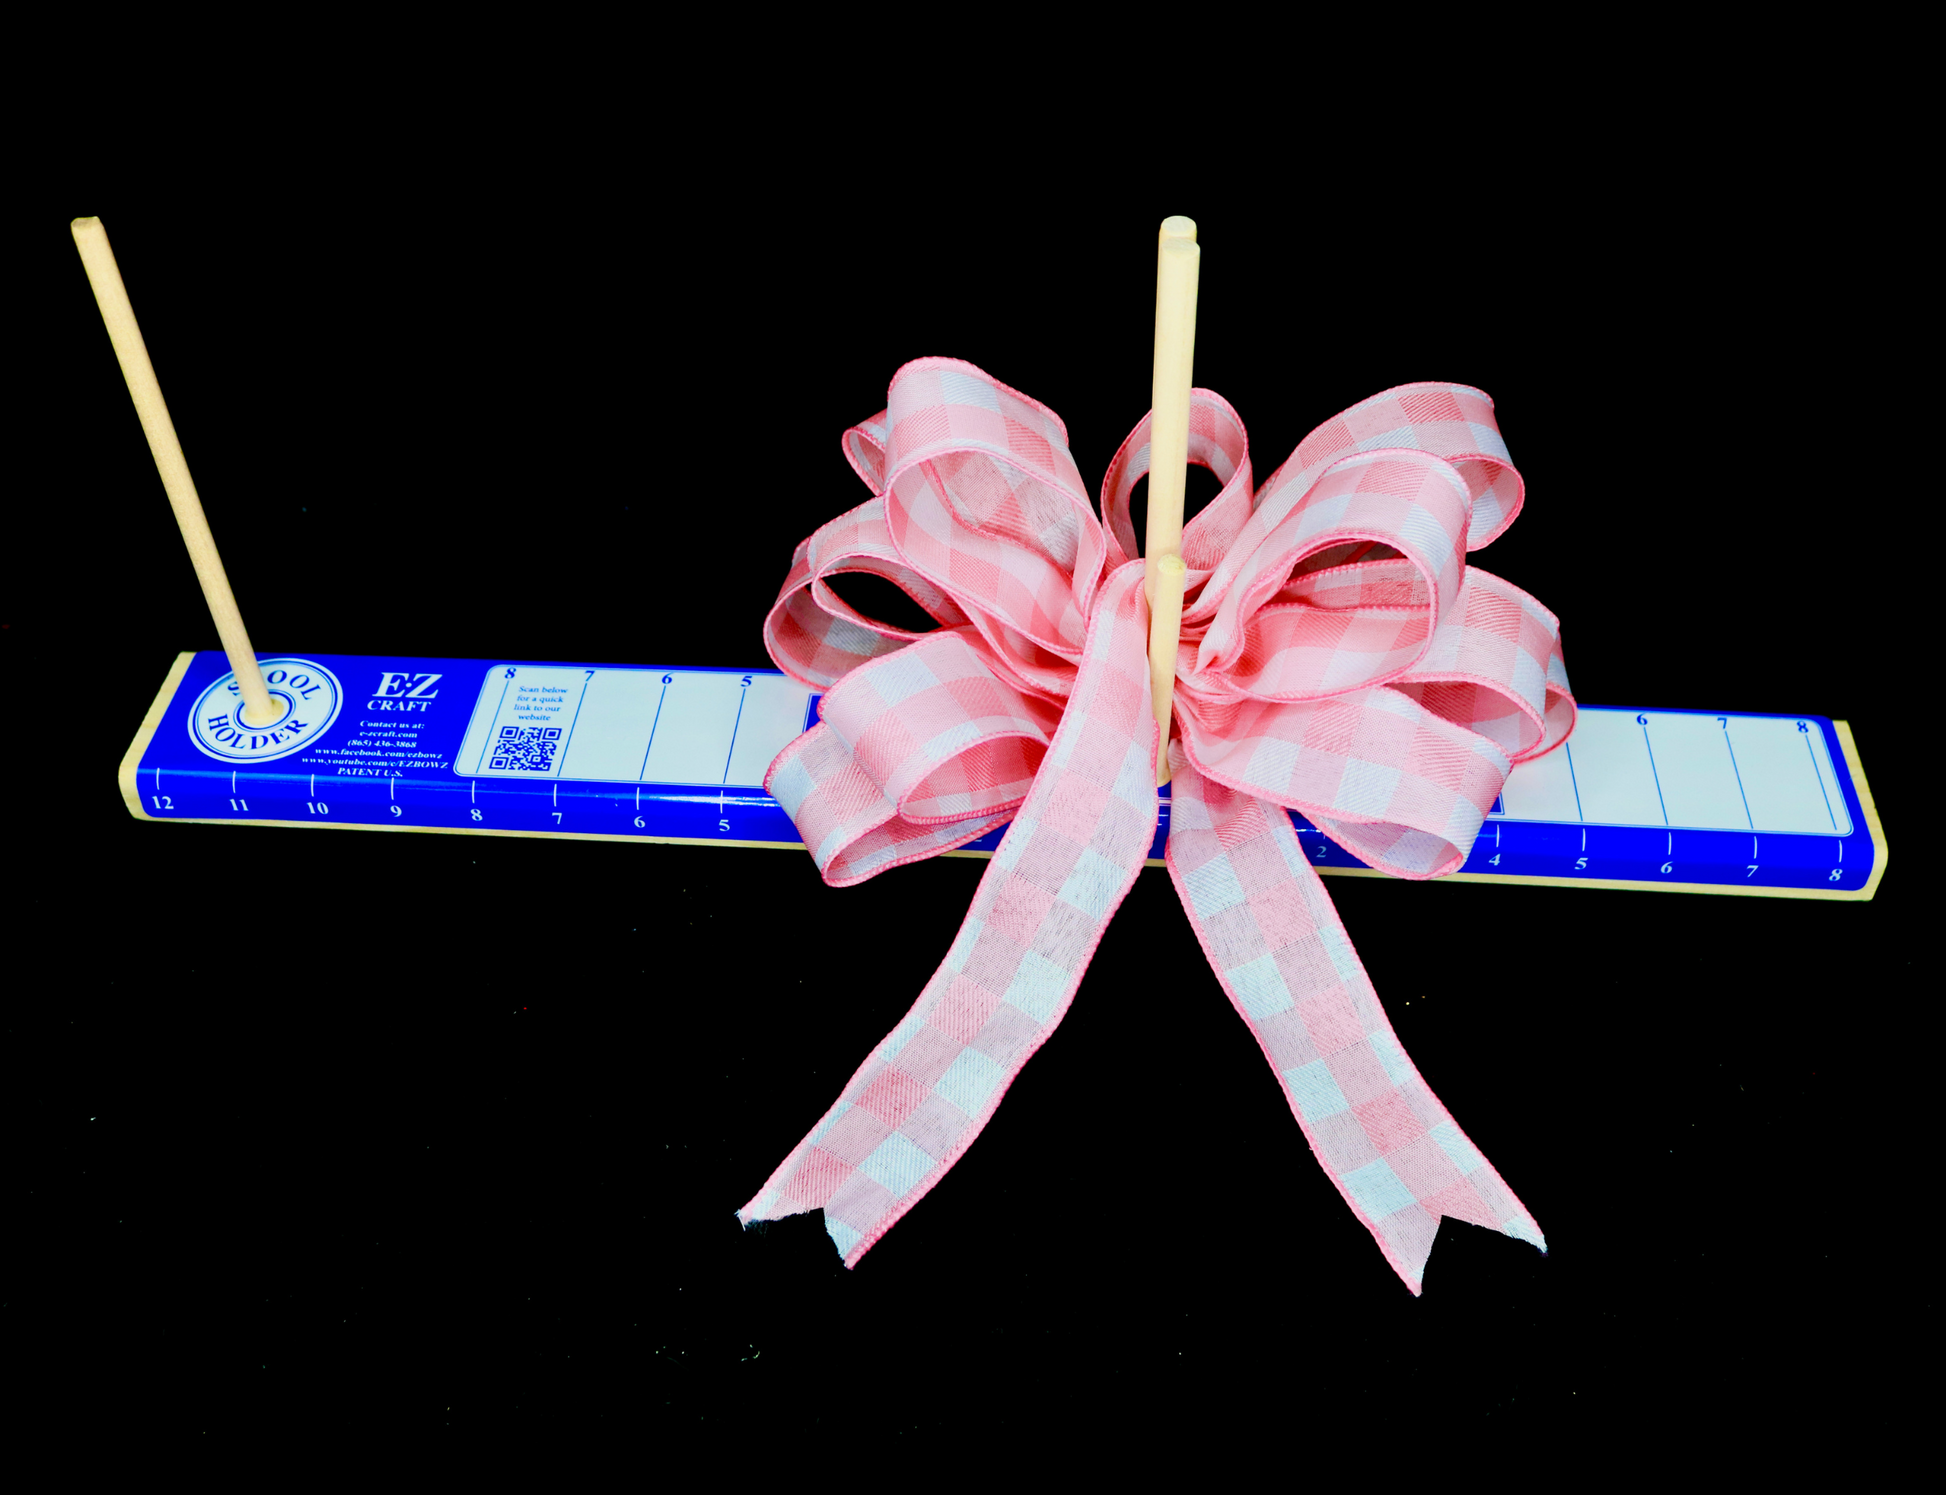 Limited Sale! Deluxe EZ Bow Maker with Ribbon Rose & Flower Maker Dowe – EZ  Craft